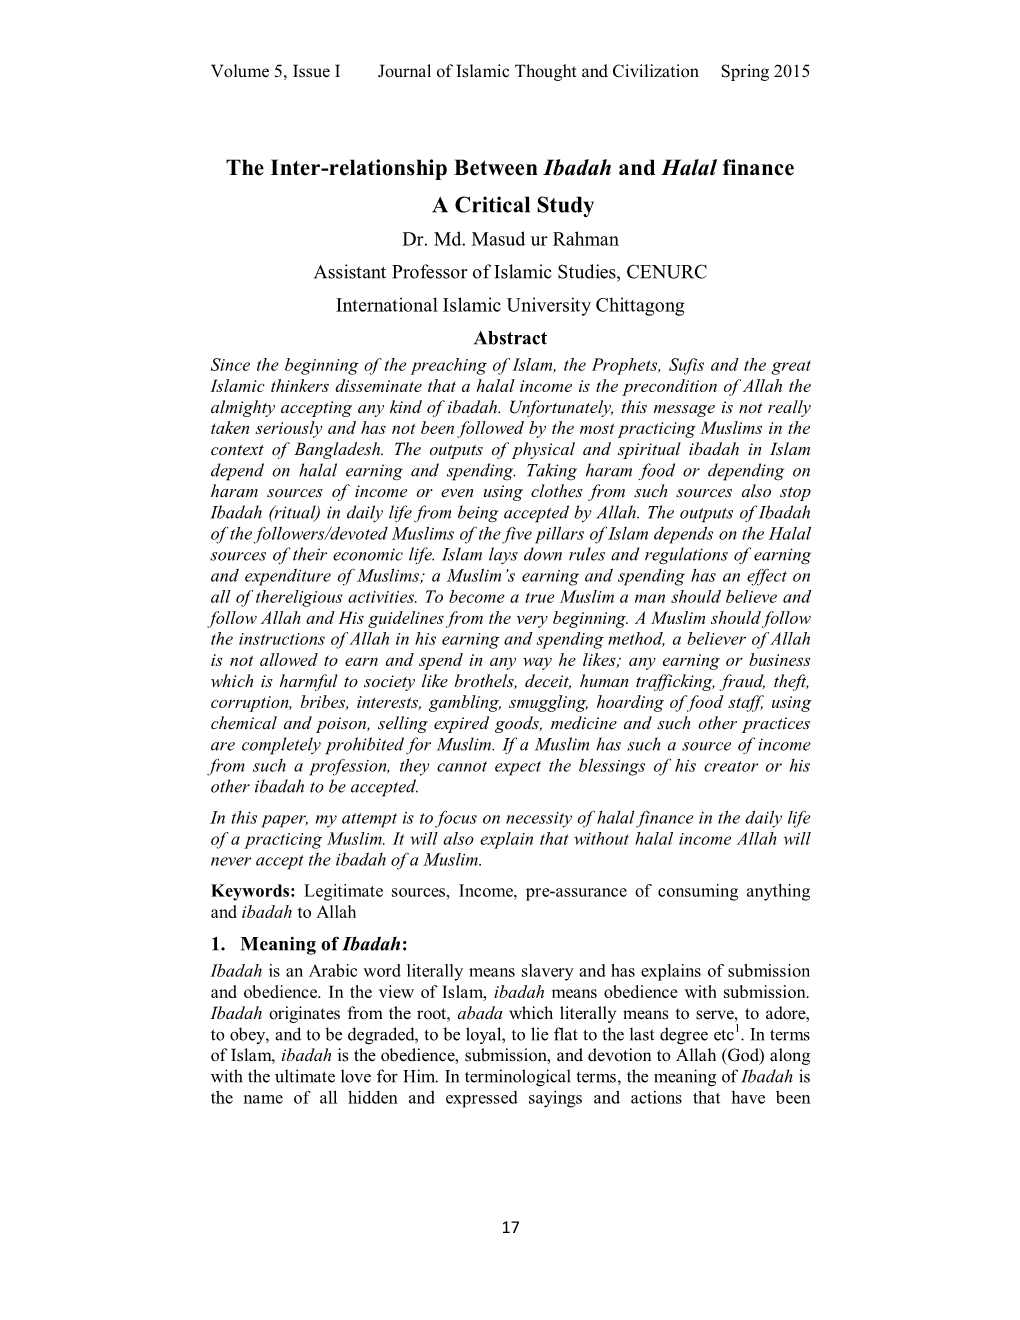 The Inter-Relationship Between Ibadah and Halal Finance a Critical Study Dr